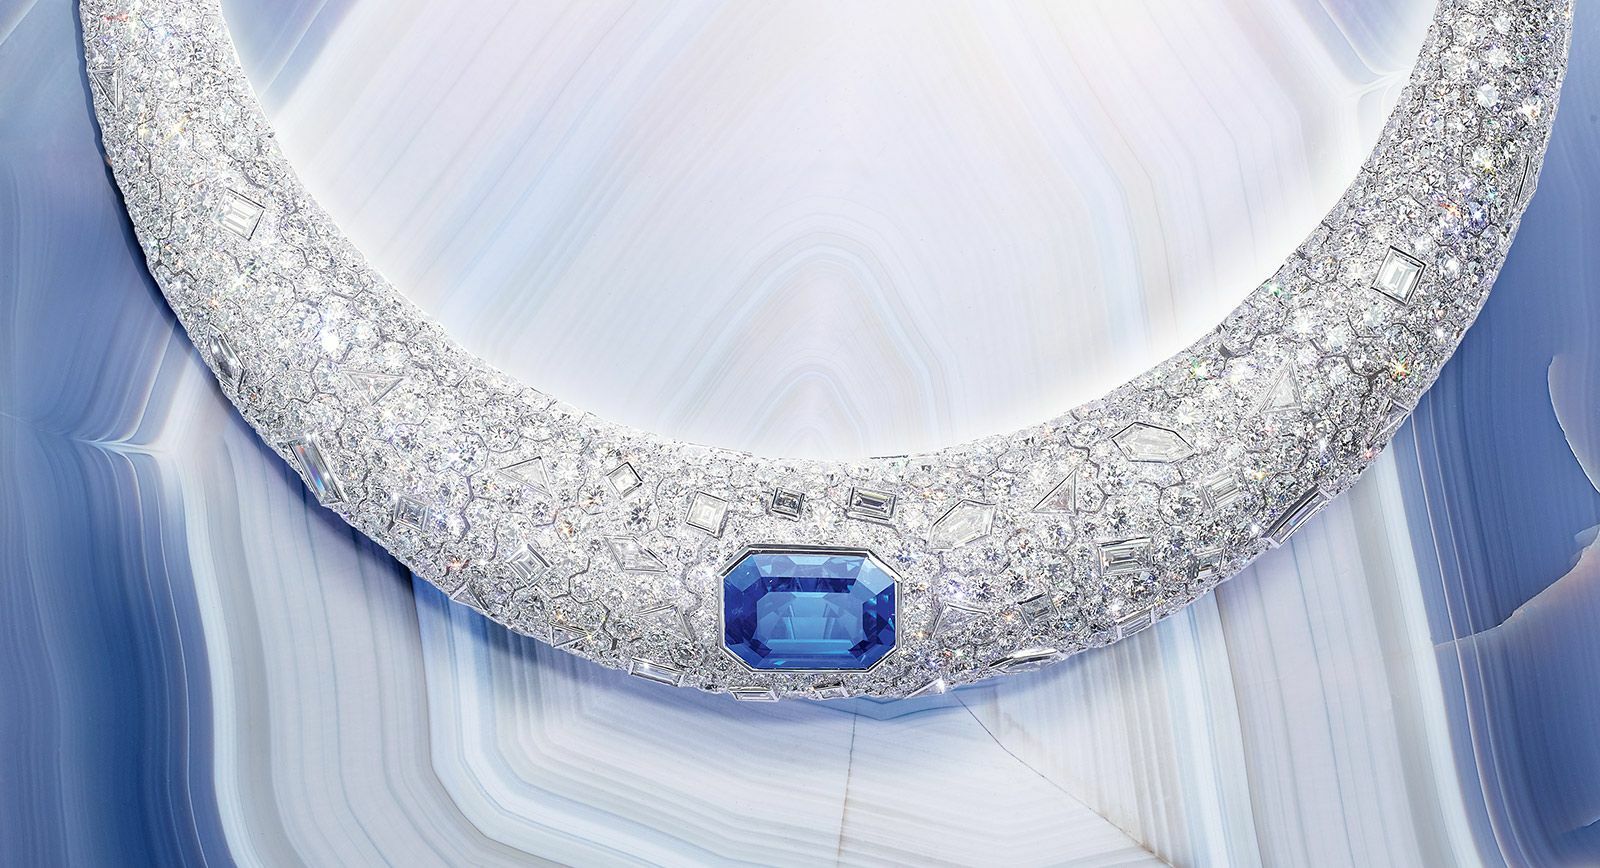 Piaget: Playing with light in the new high jewellery collection ‘Sunlight Escape’